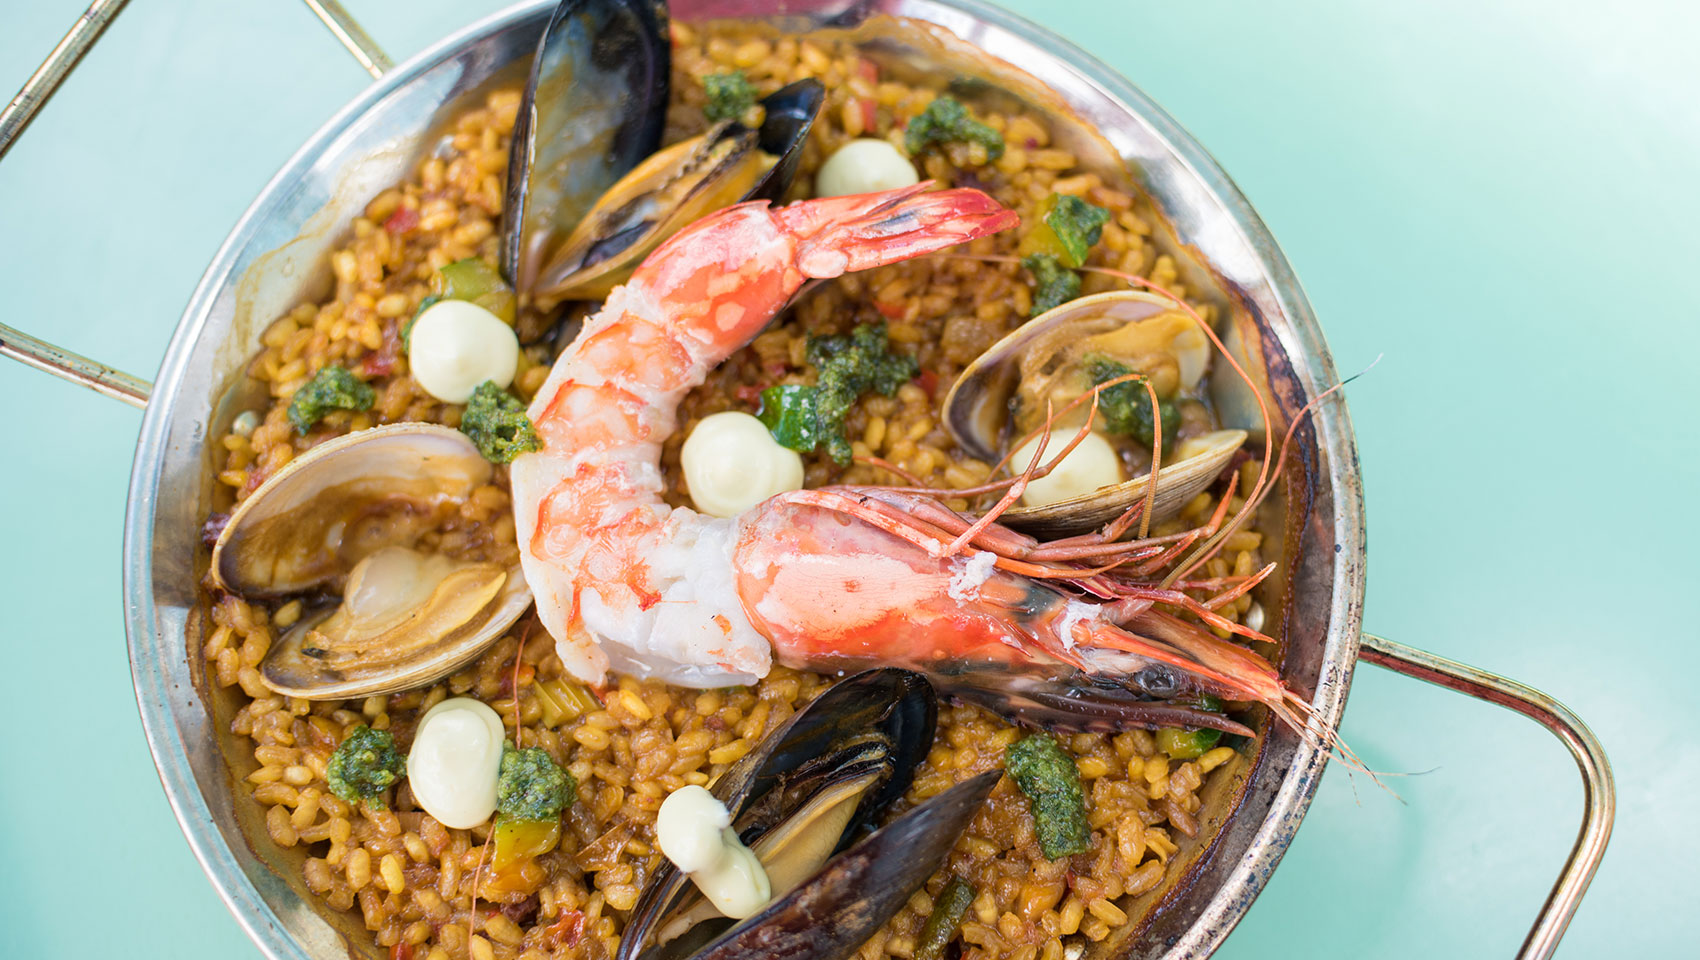 paella-with-chicken-chorizo-mussels-prawns-squid-pimento-pepper-photo-credit-adorned-photography